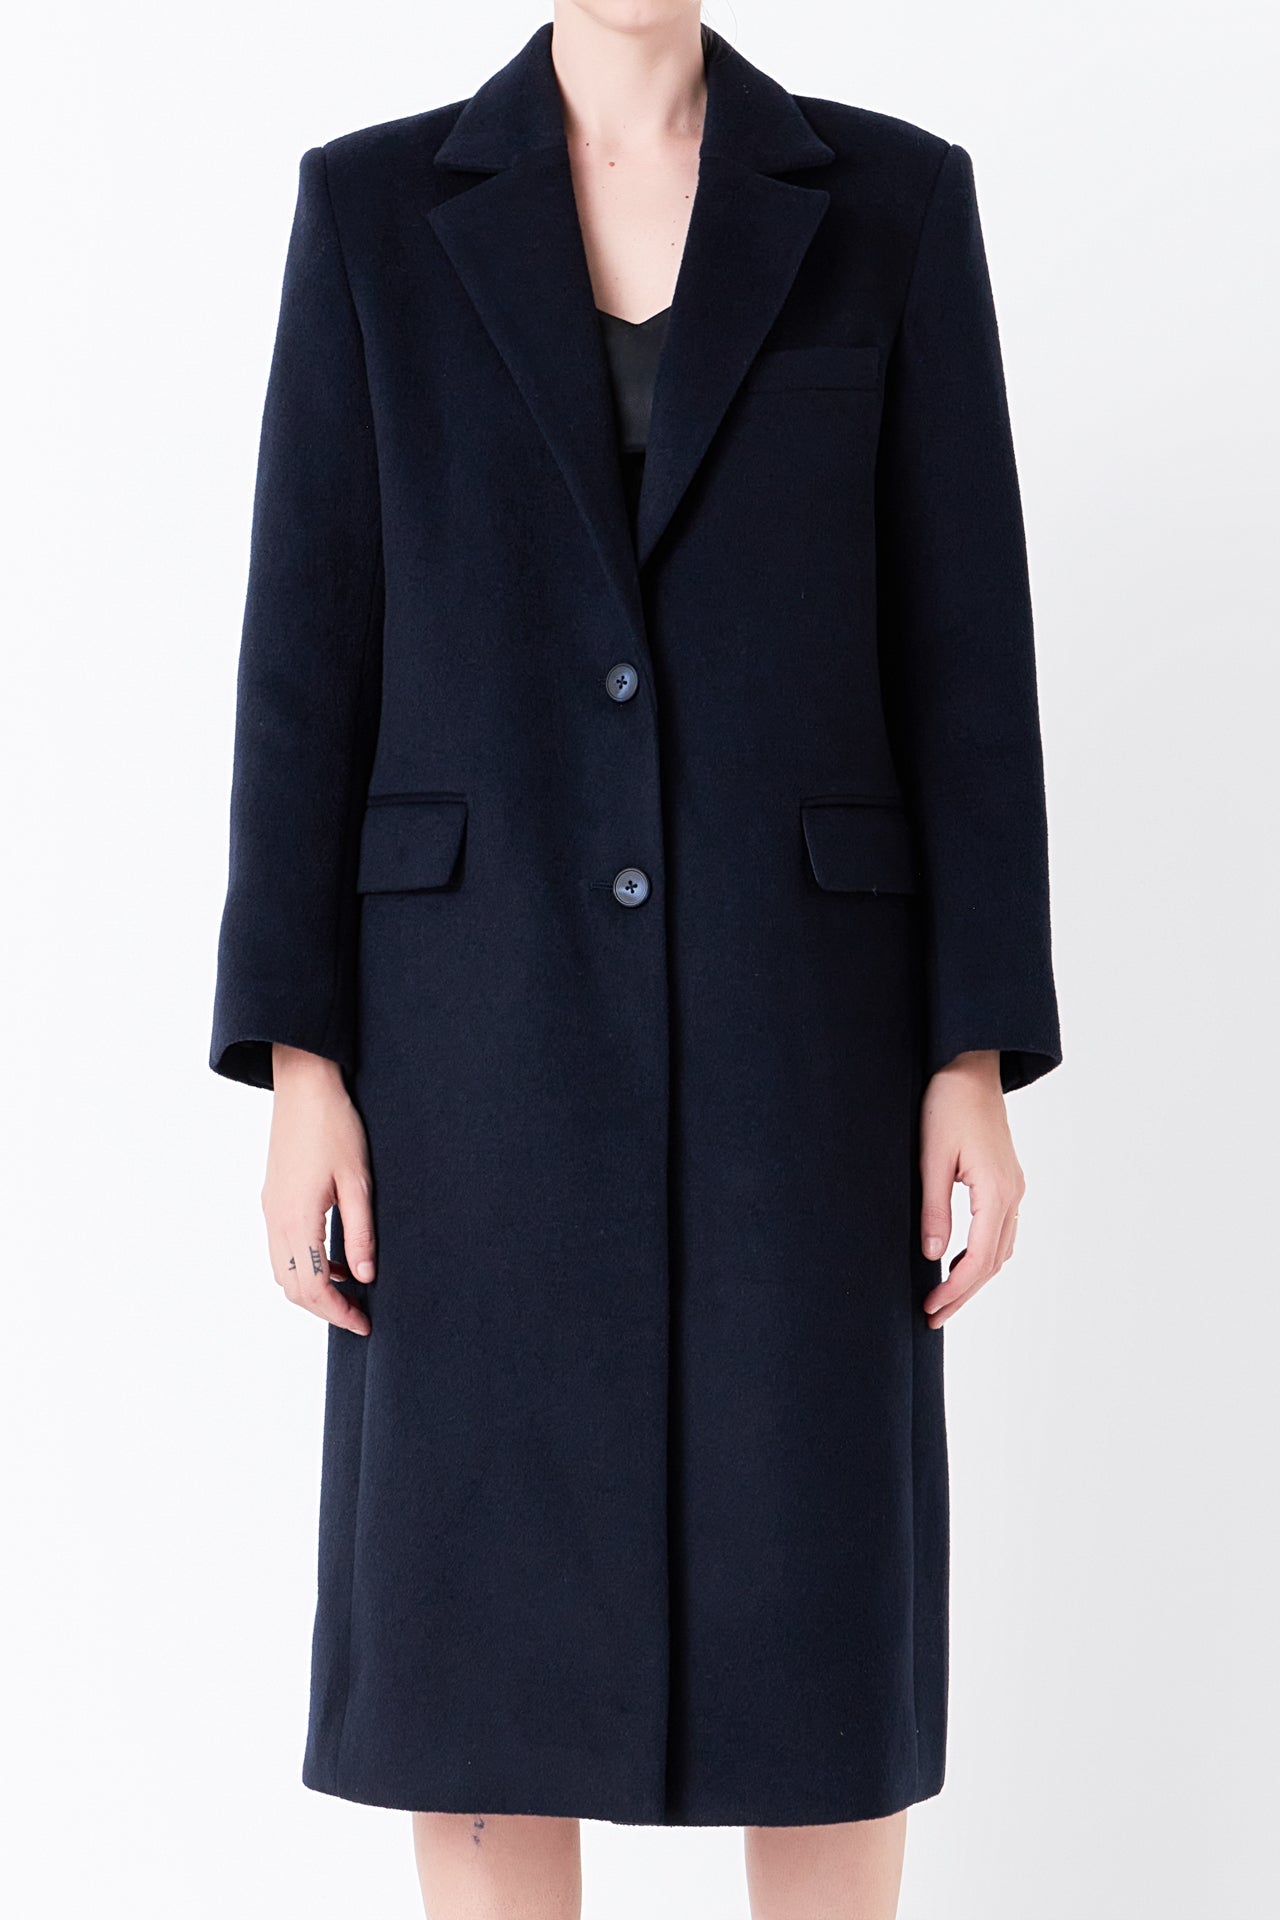 GREY LAB - Oversize Wool Trench Coat - COATS available at Objectrare